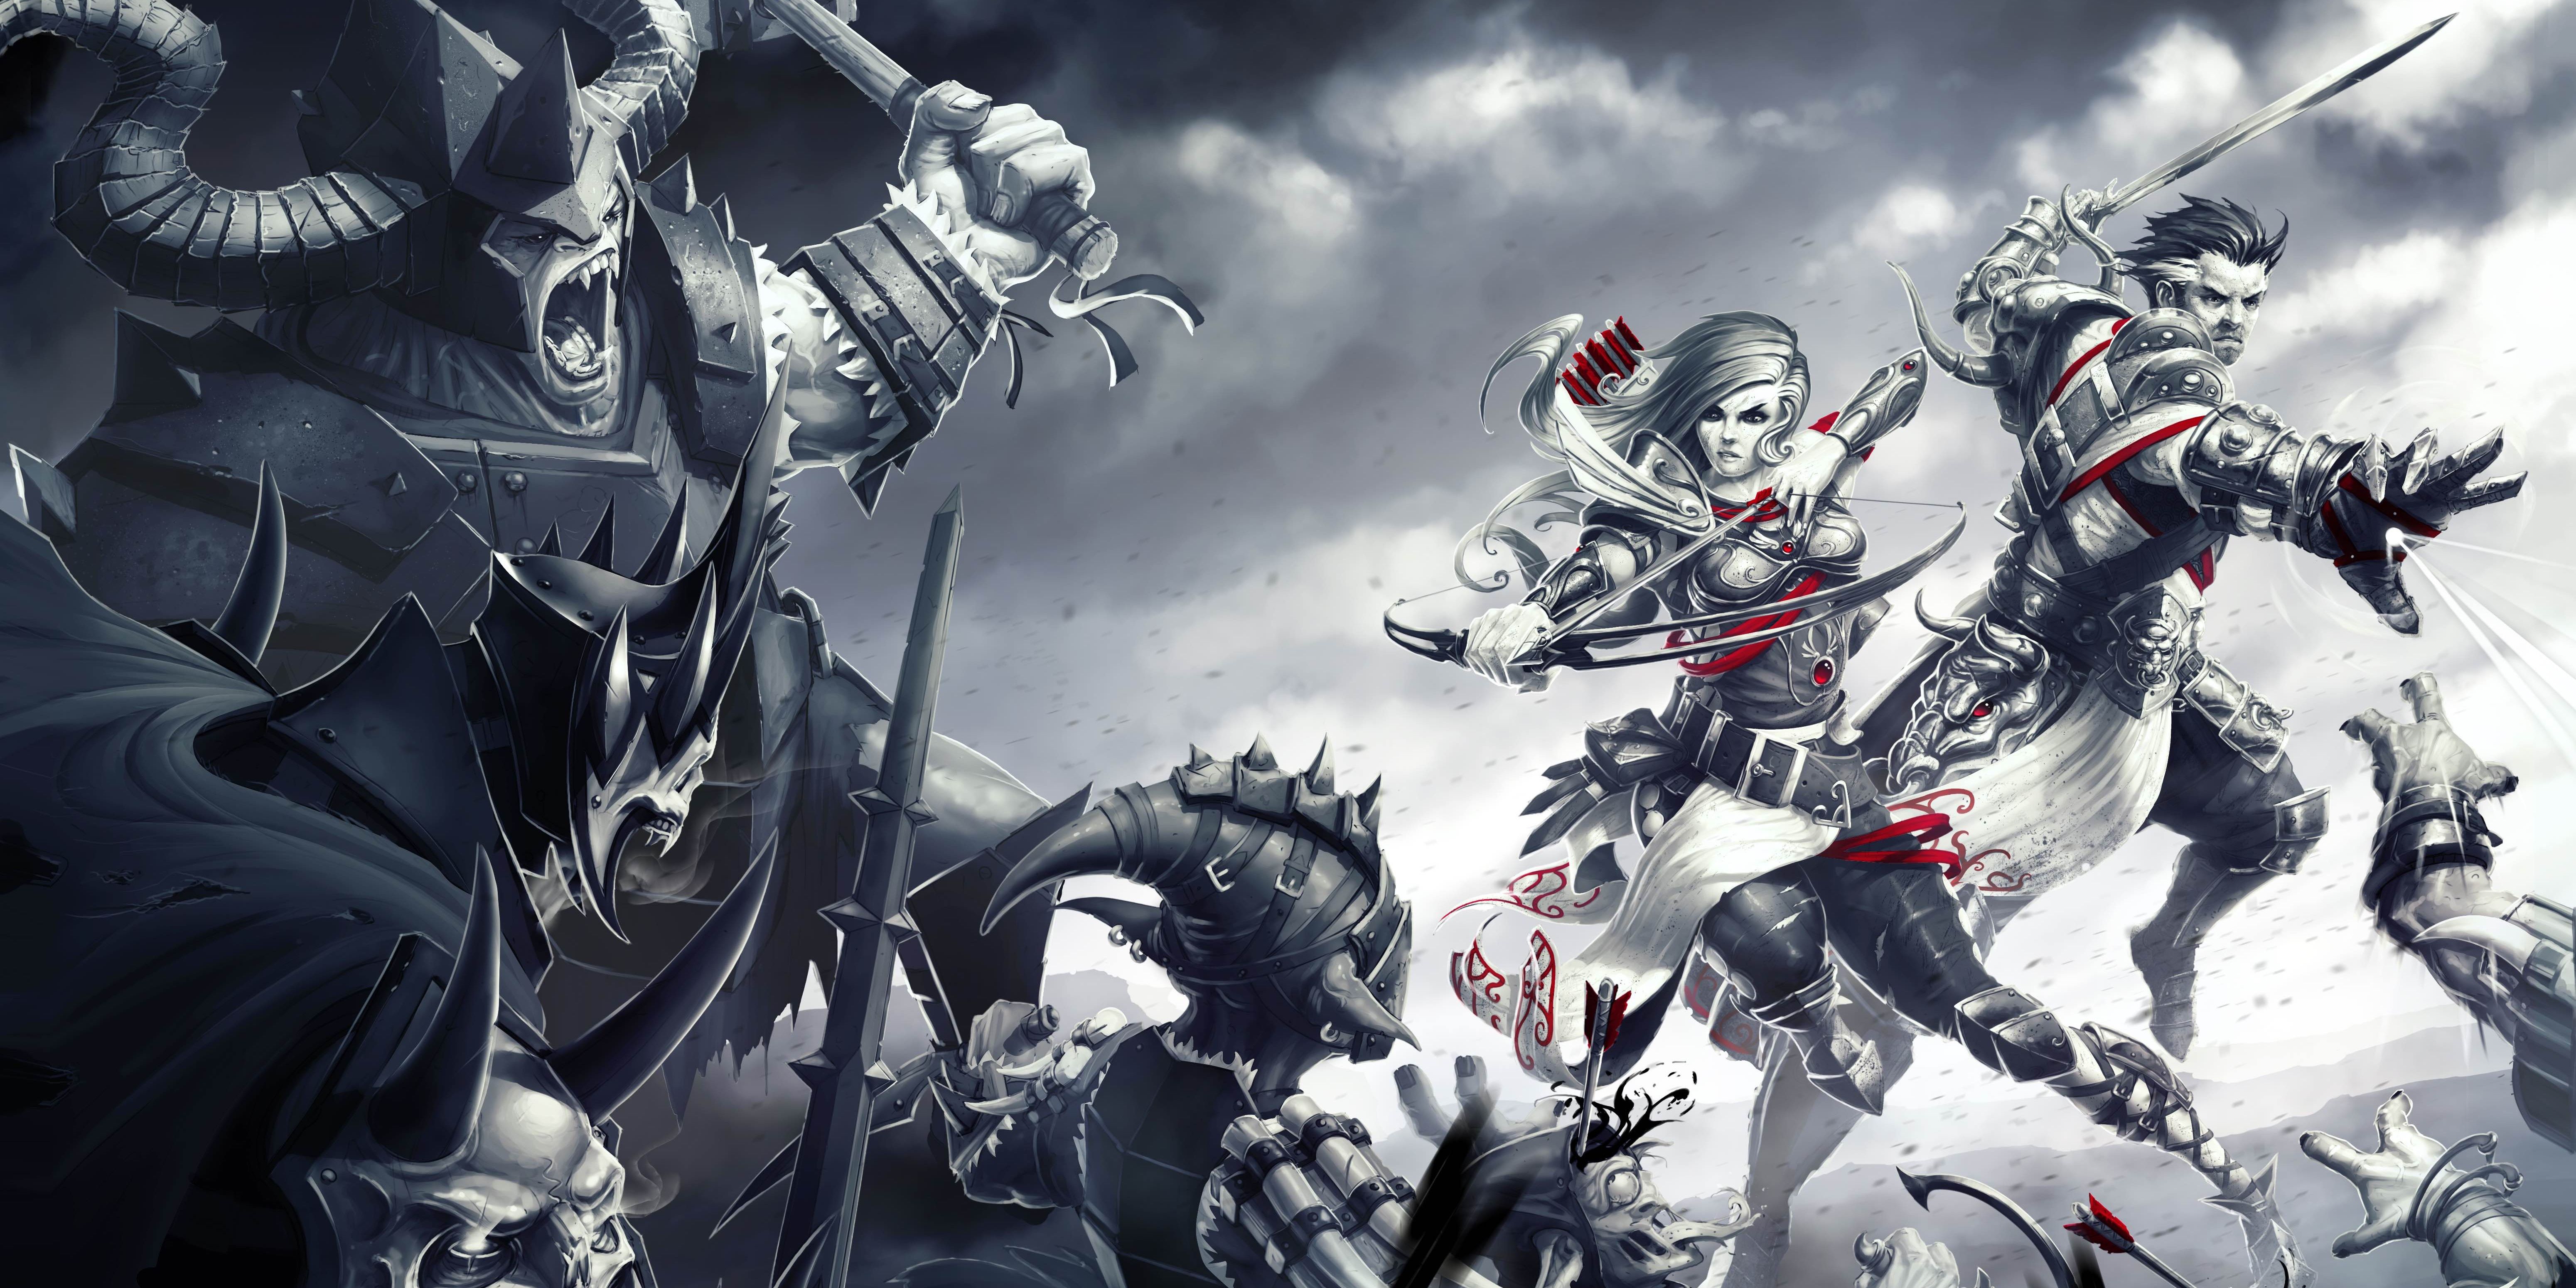 poster for Divinity Original Sin Enhanced Edition featuring the Source Hunters fighting enemies